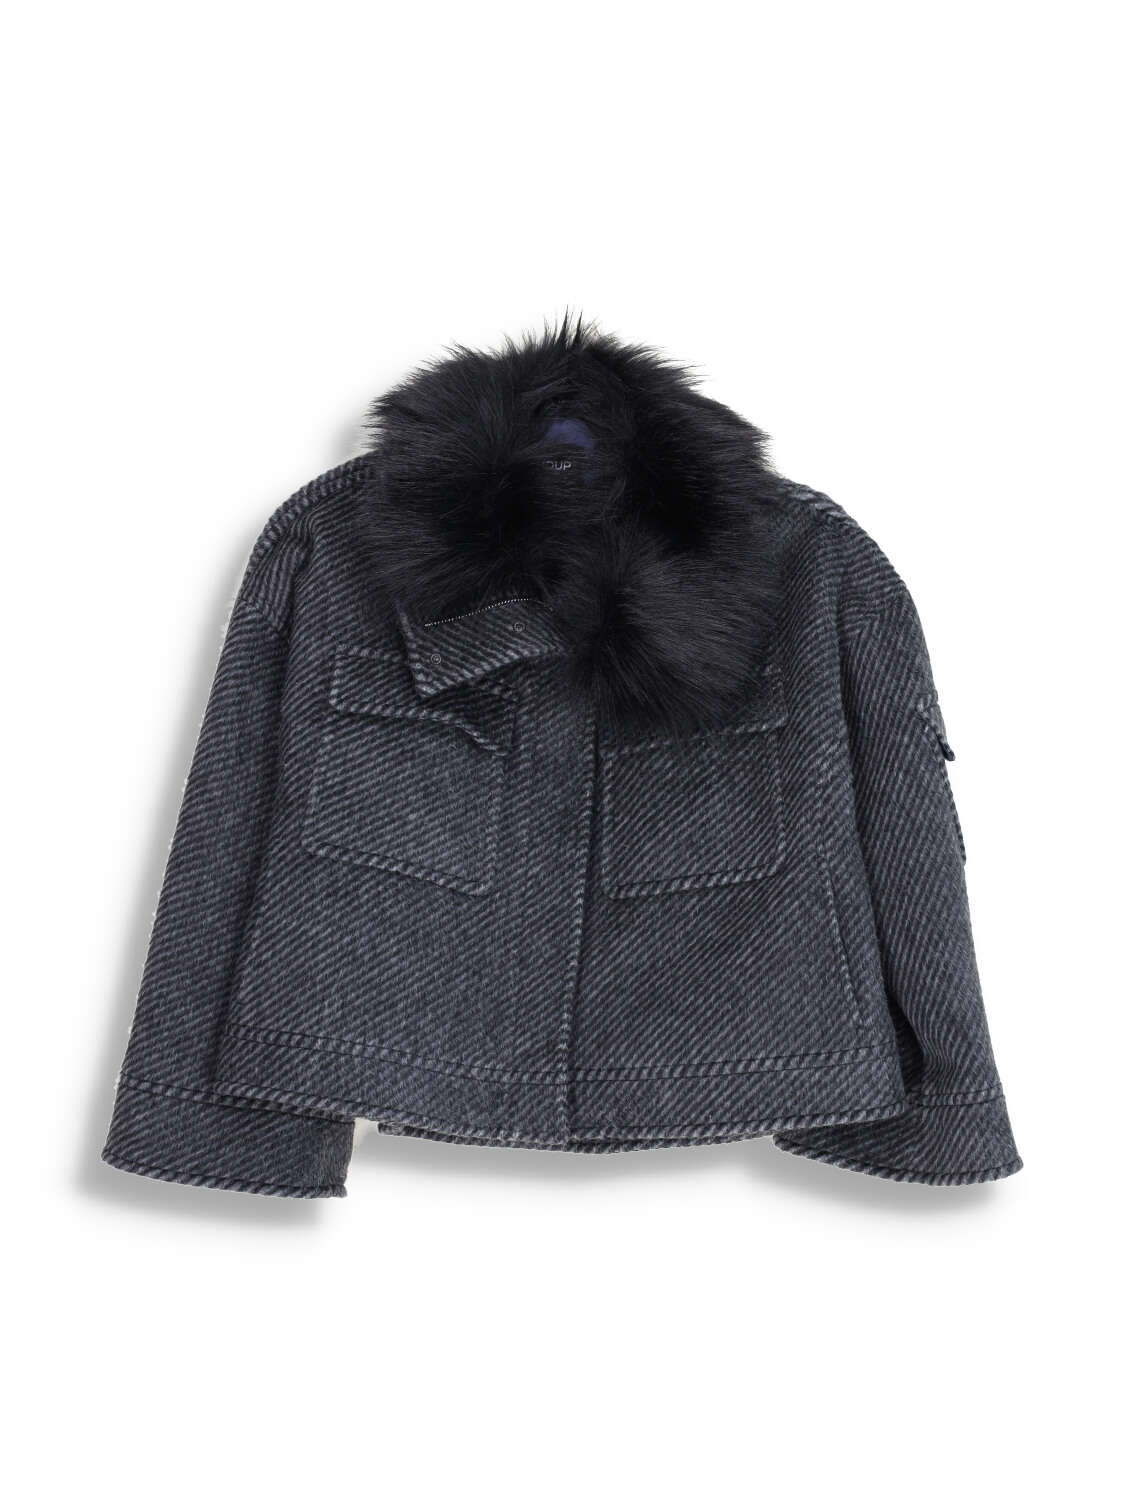 Jacket with fur collar and stripe design